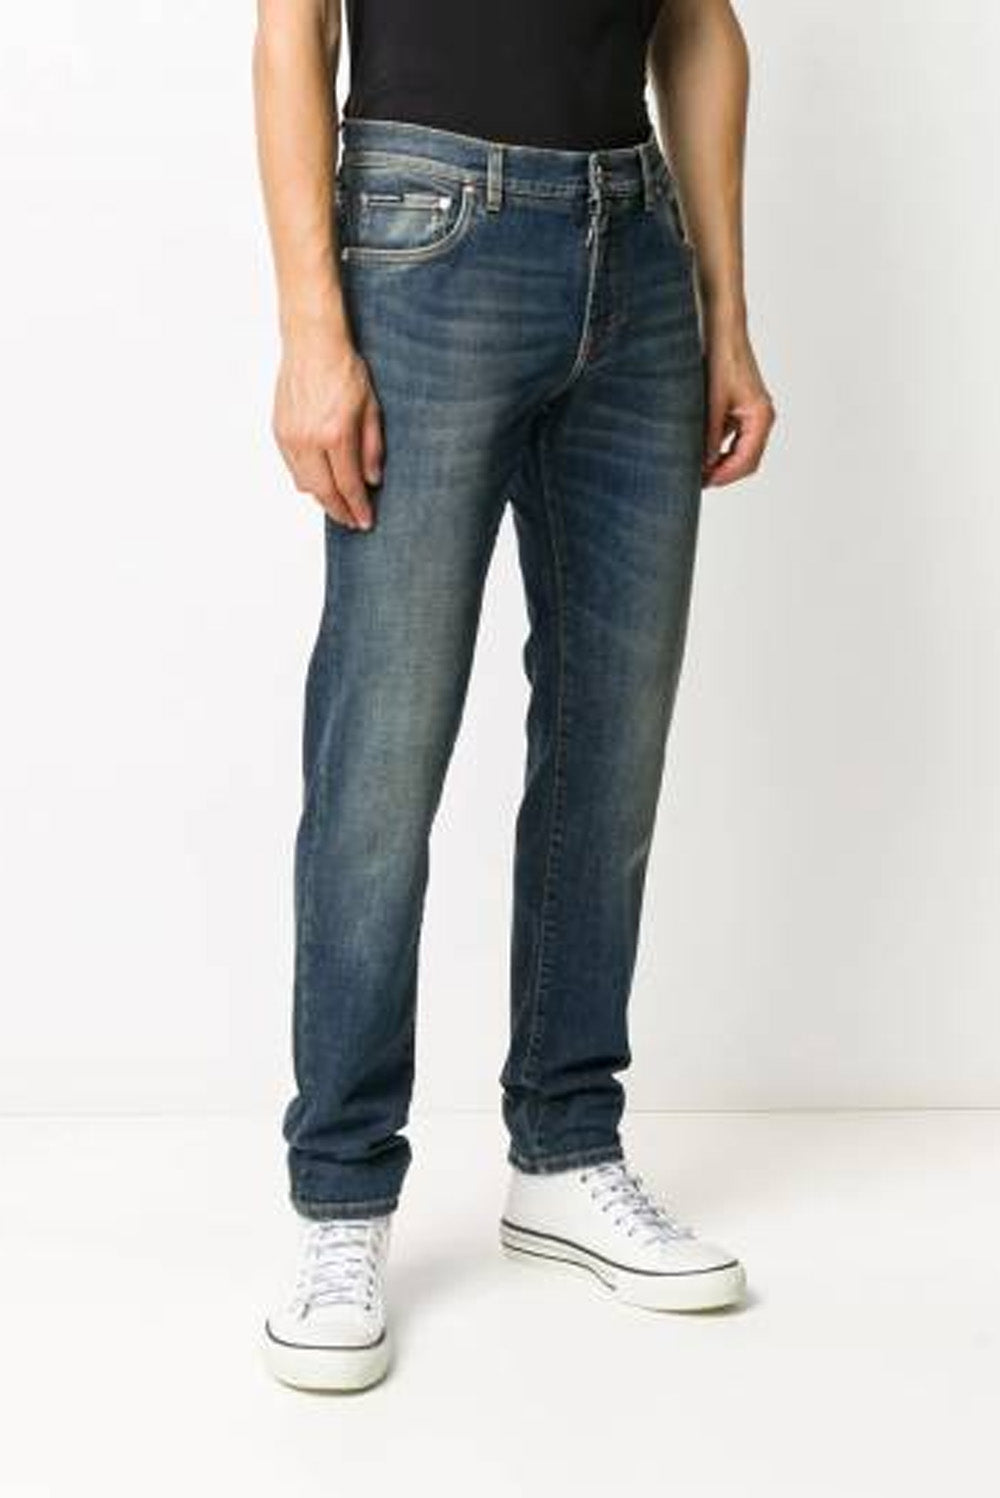 Dolce & Gabbana Distressed Straight Leg Jeans In Blue